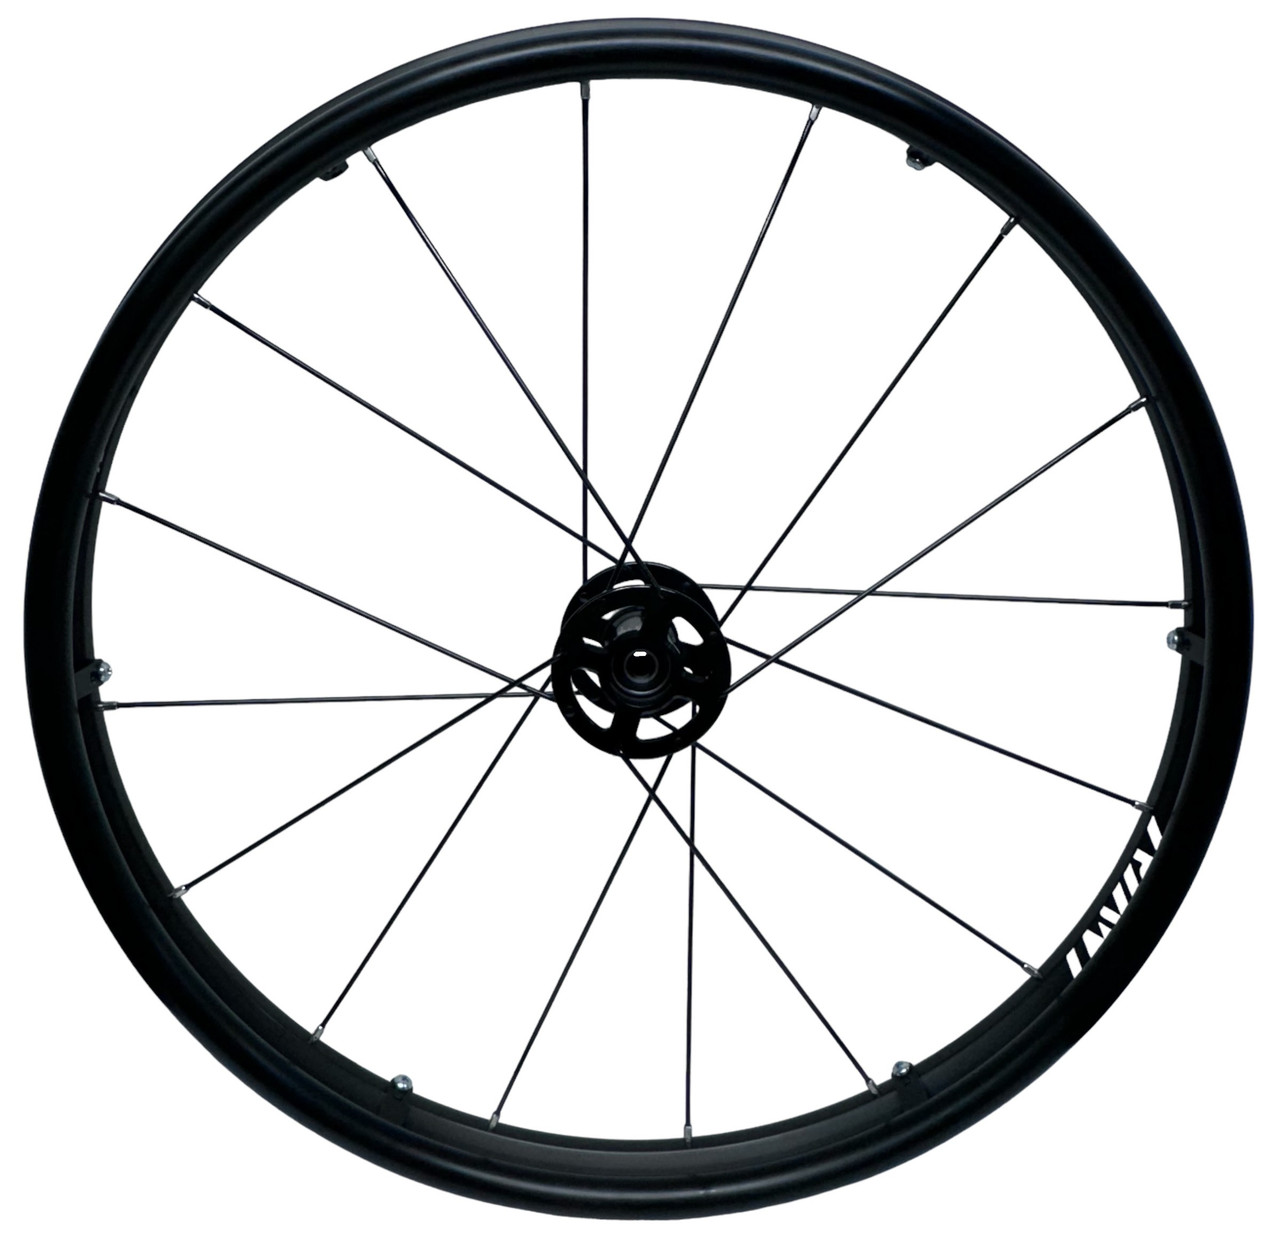 24" (540mm) 16 Spokes Wheel With Pushrims Only. BLACK HUB. No Tires. Set of 2